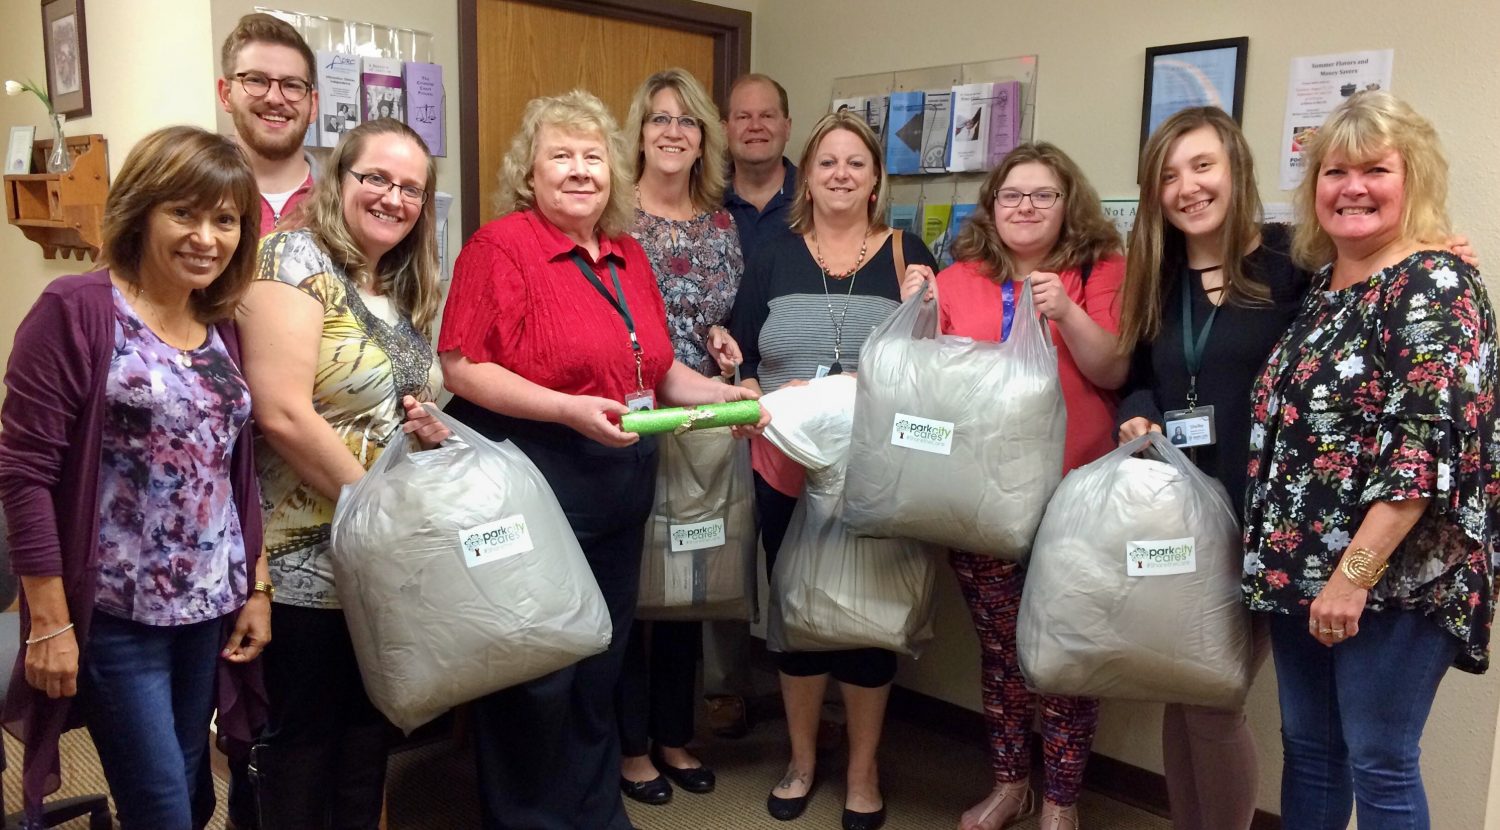 HAVEN receives ‘Random Acts of Kindness’ from PCCU staff